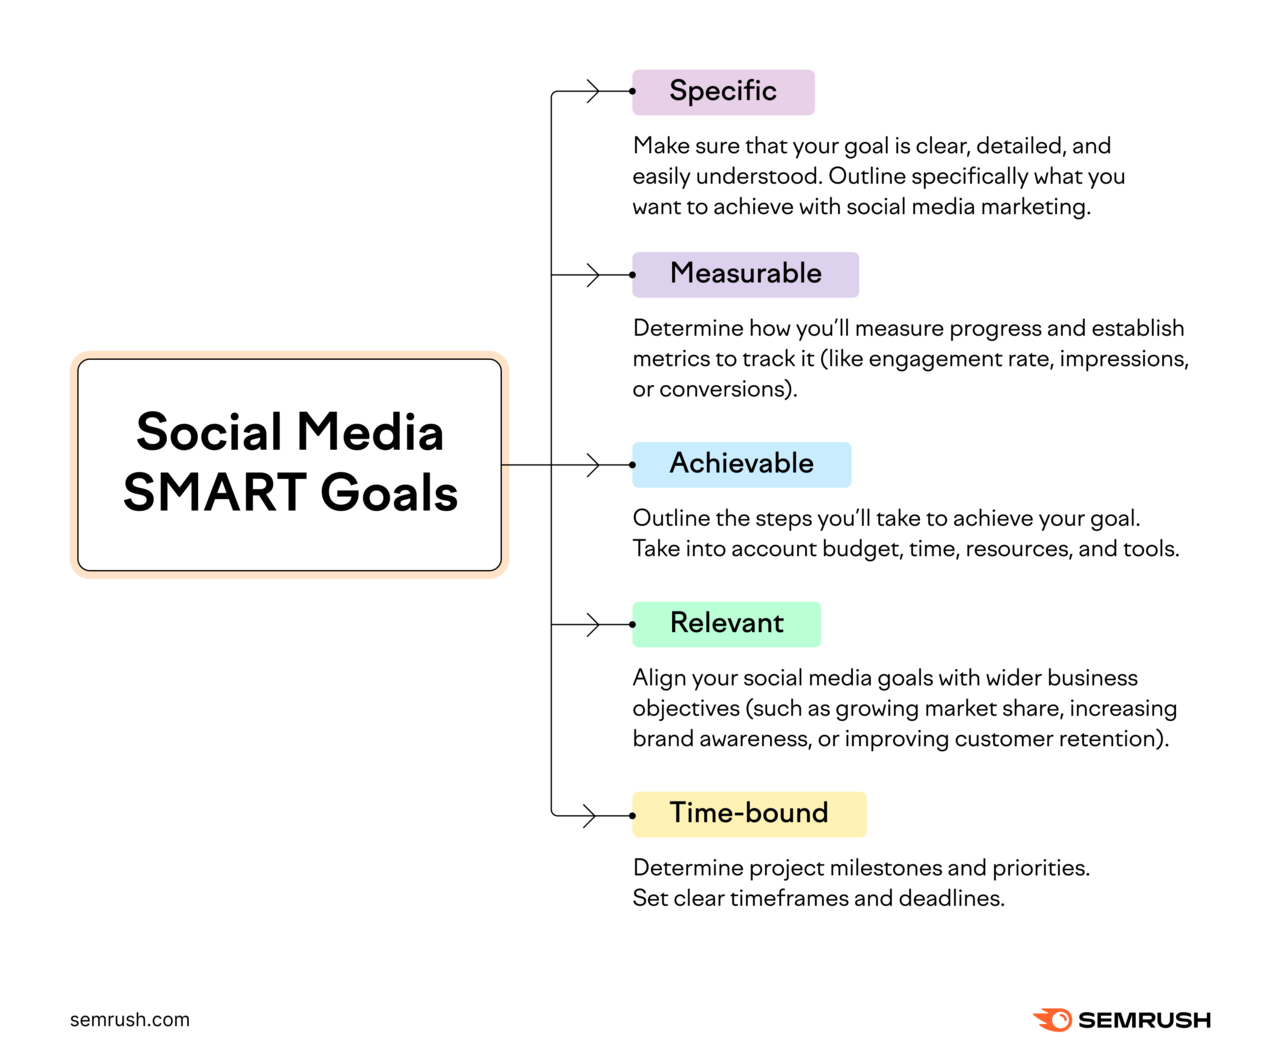 Smart societal  media goals are specific, measurable, achievable, relevant, and time-bound.